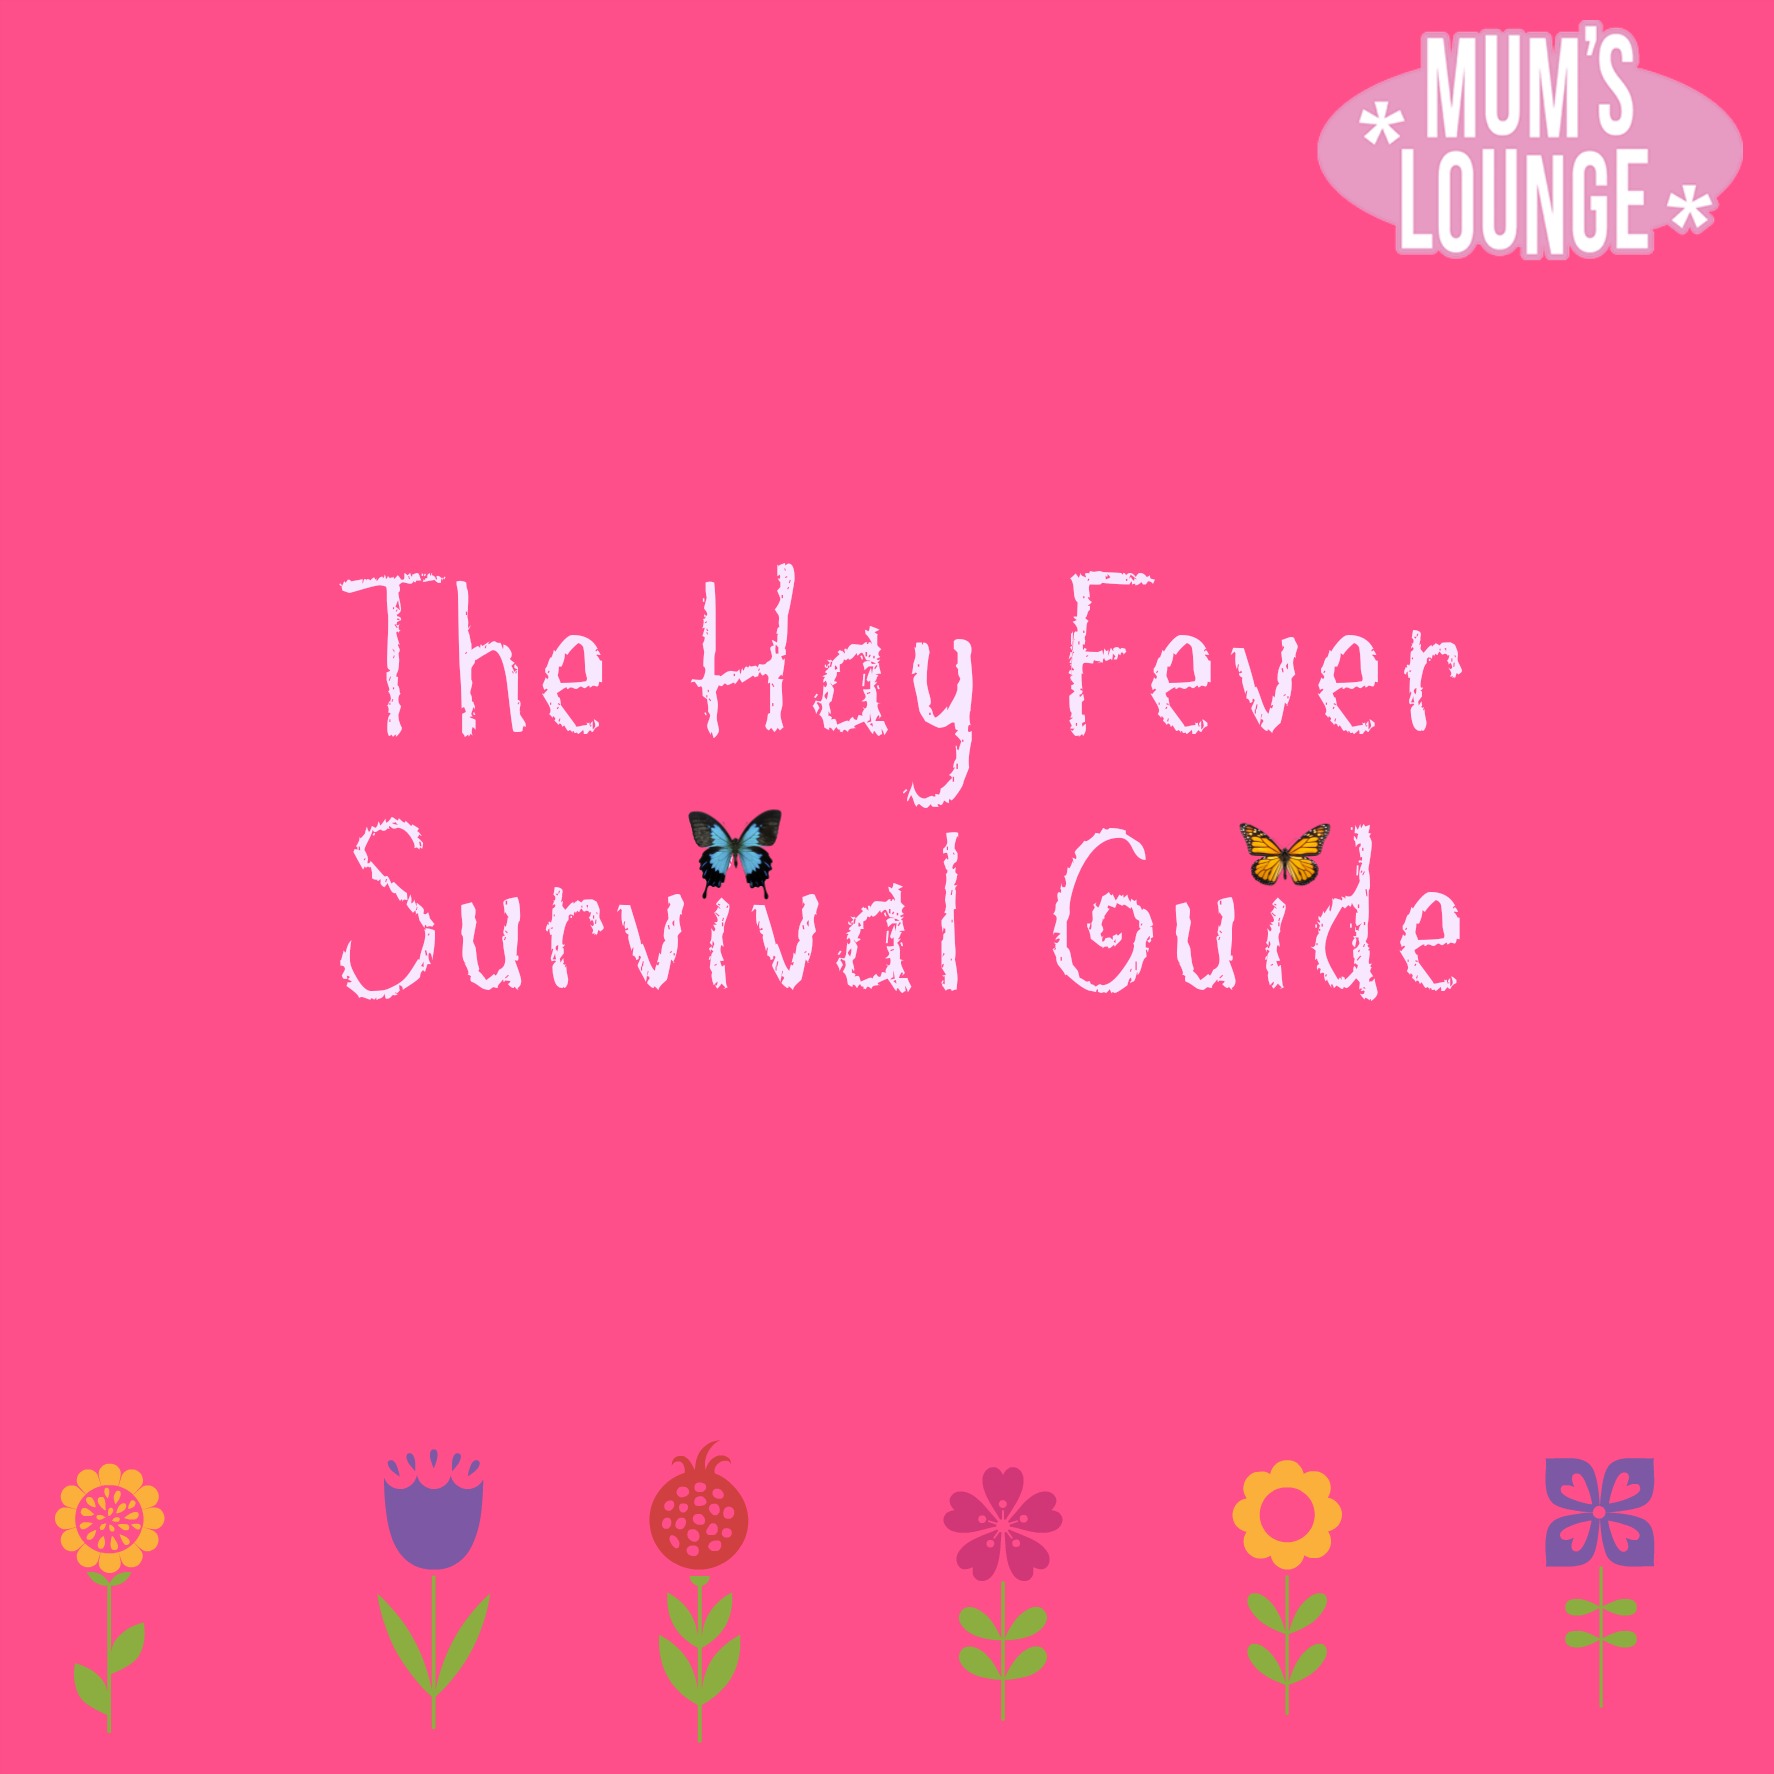 hay fever survival guide